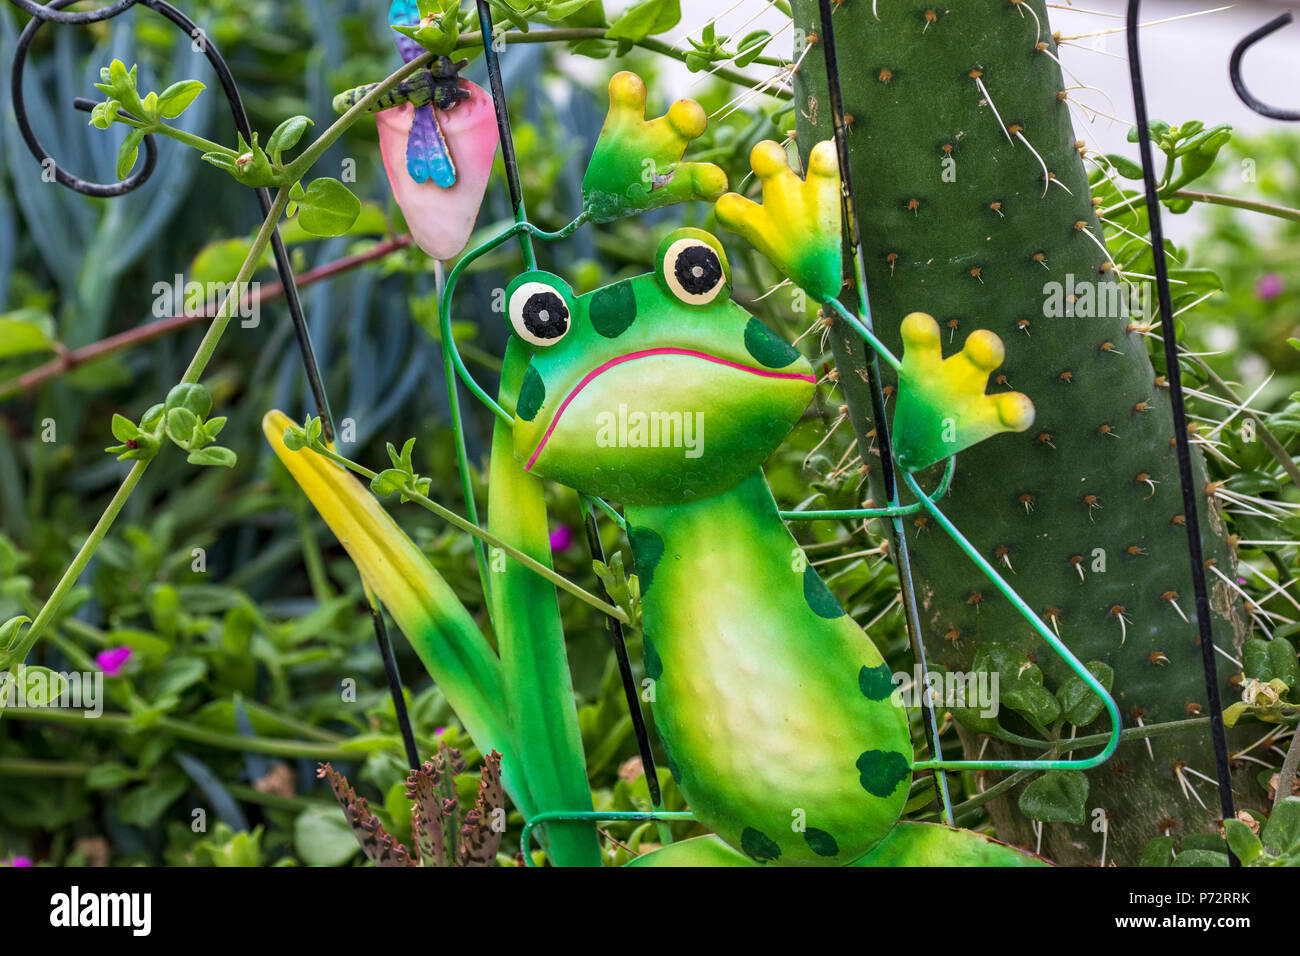 Whimsical Garden Art Decoration - Green and Yellow Frog Stock Photo